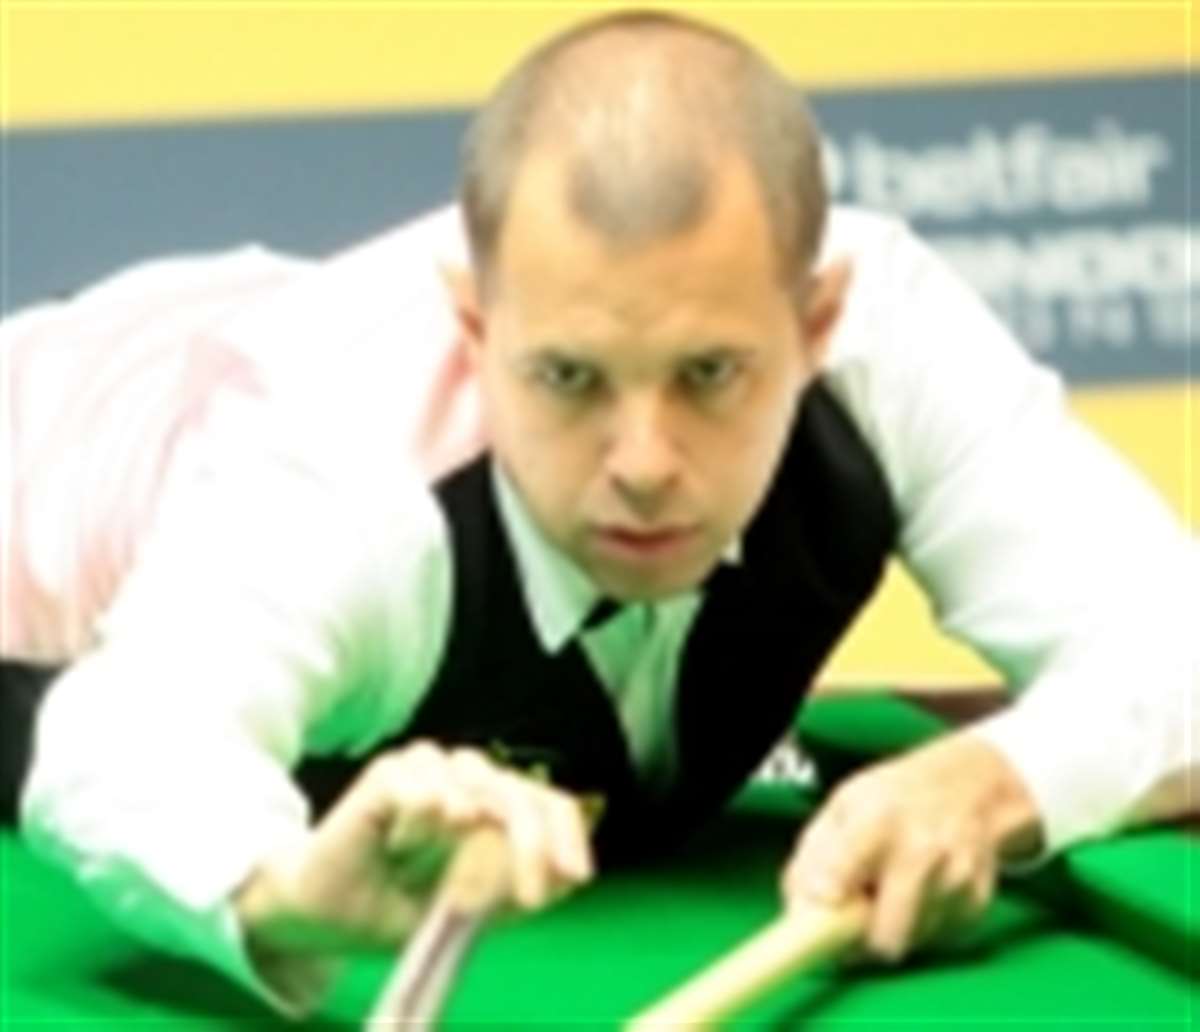 Ditton snooker player Barry Hawkins beats Ding Junhui to reach semi-finals of the World Championship at the Crucible